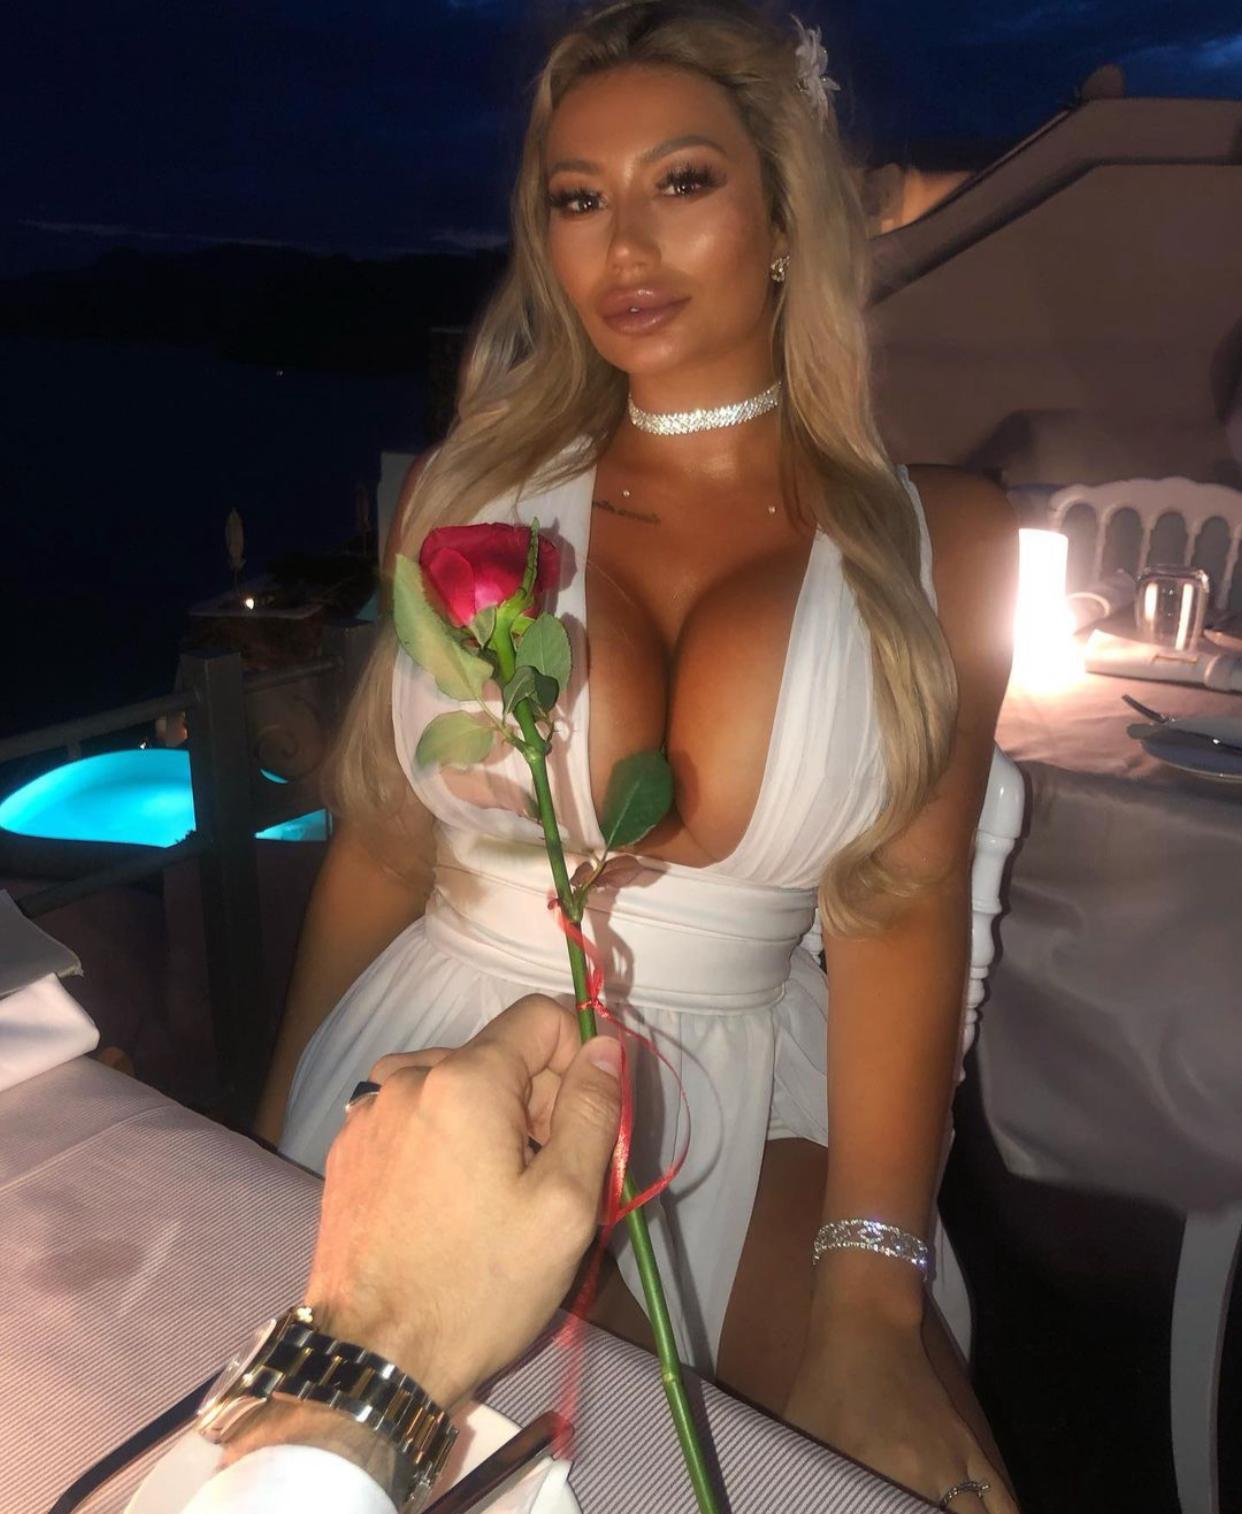 Sophie wearing a blue dress with a rose being offered to her 